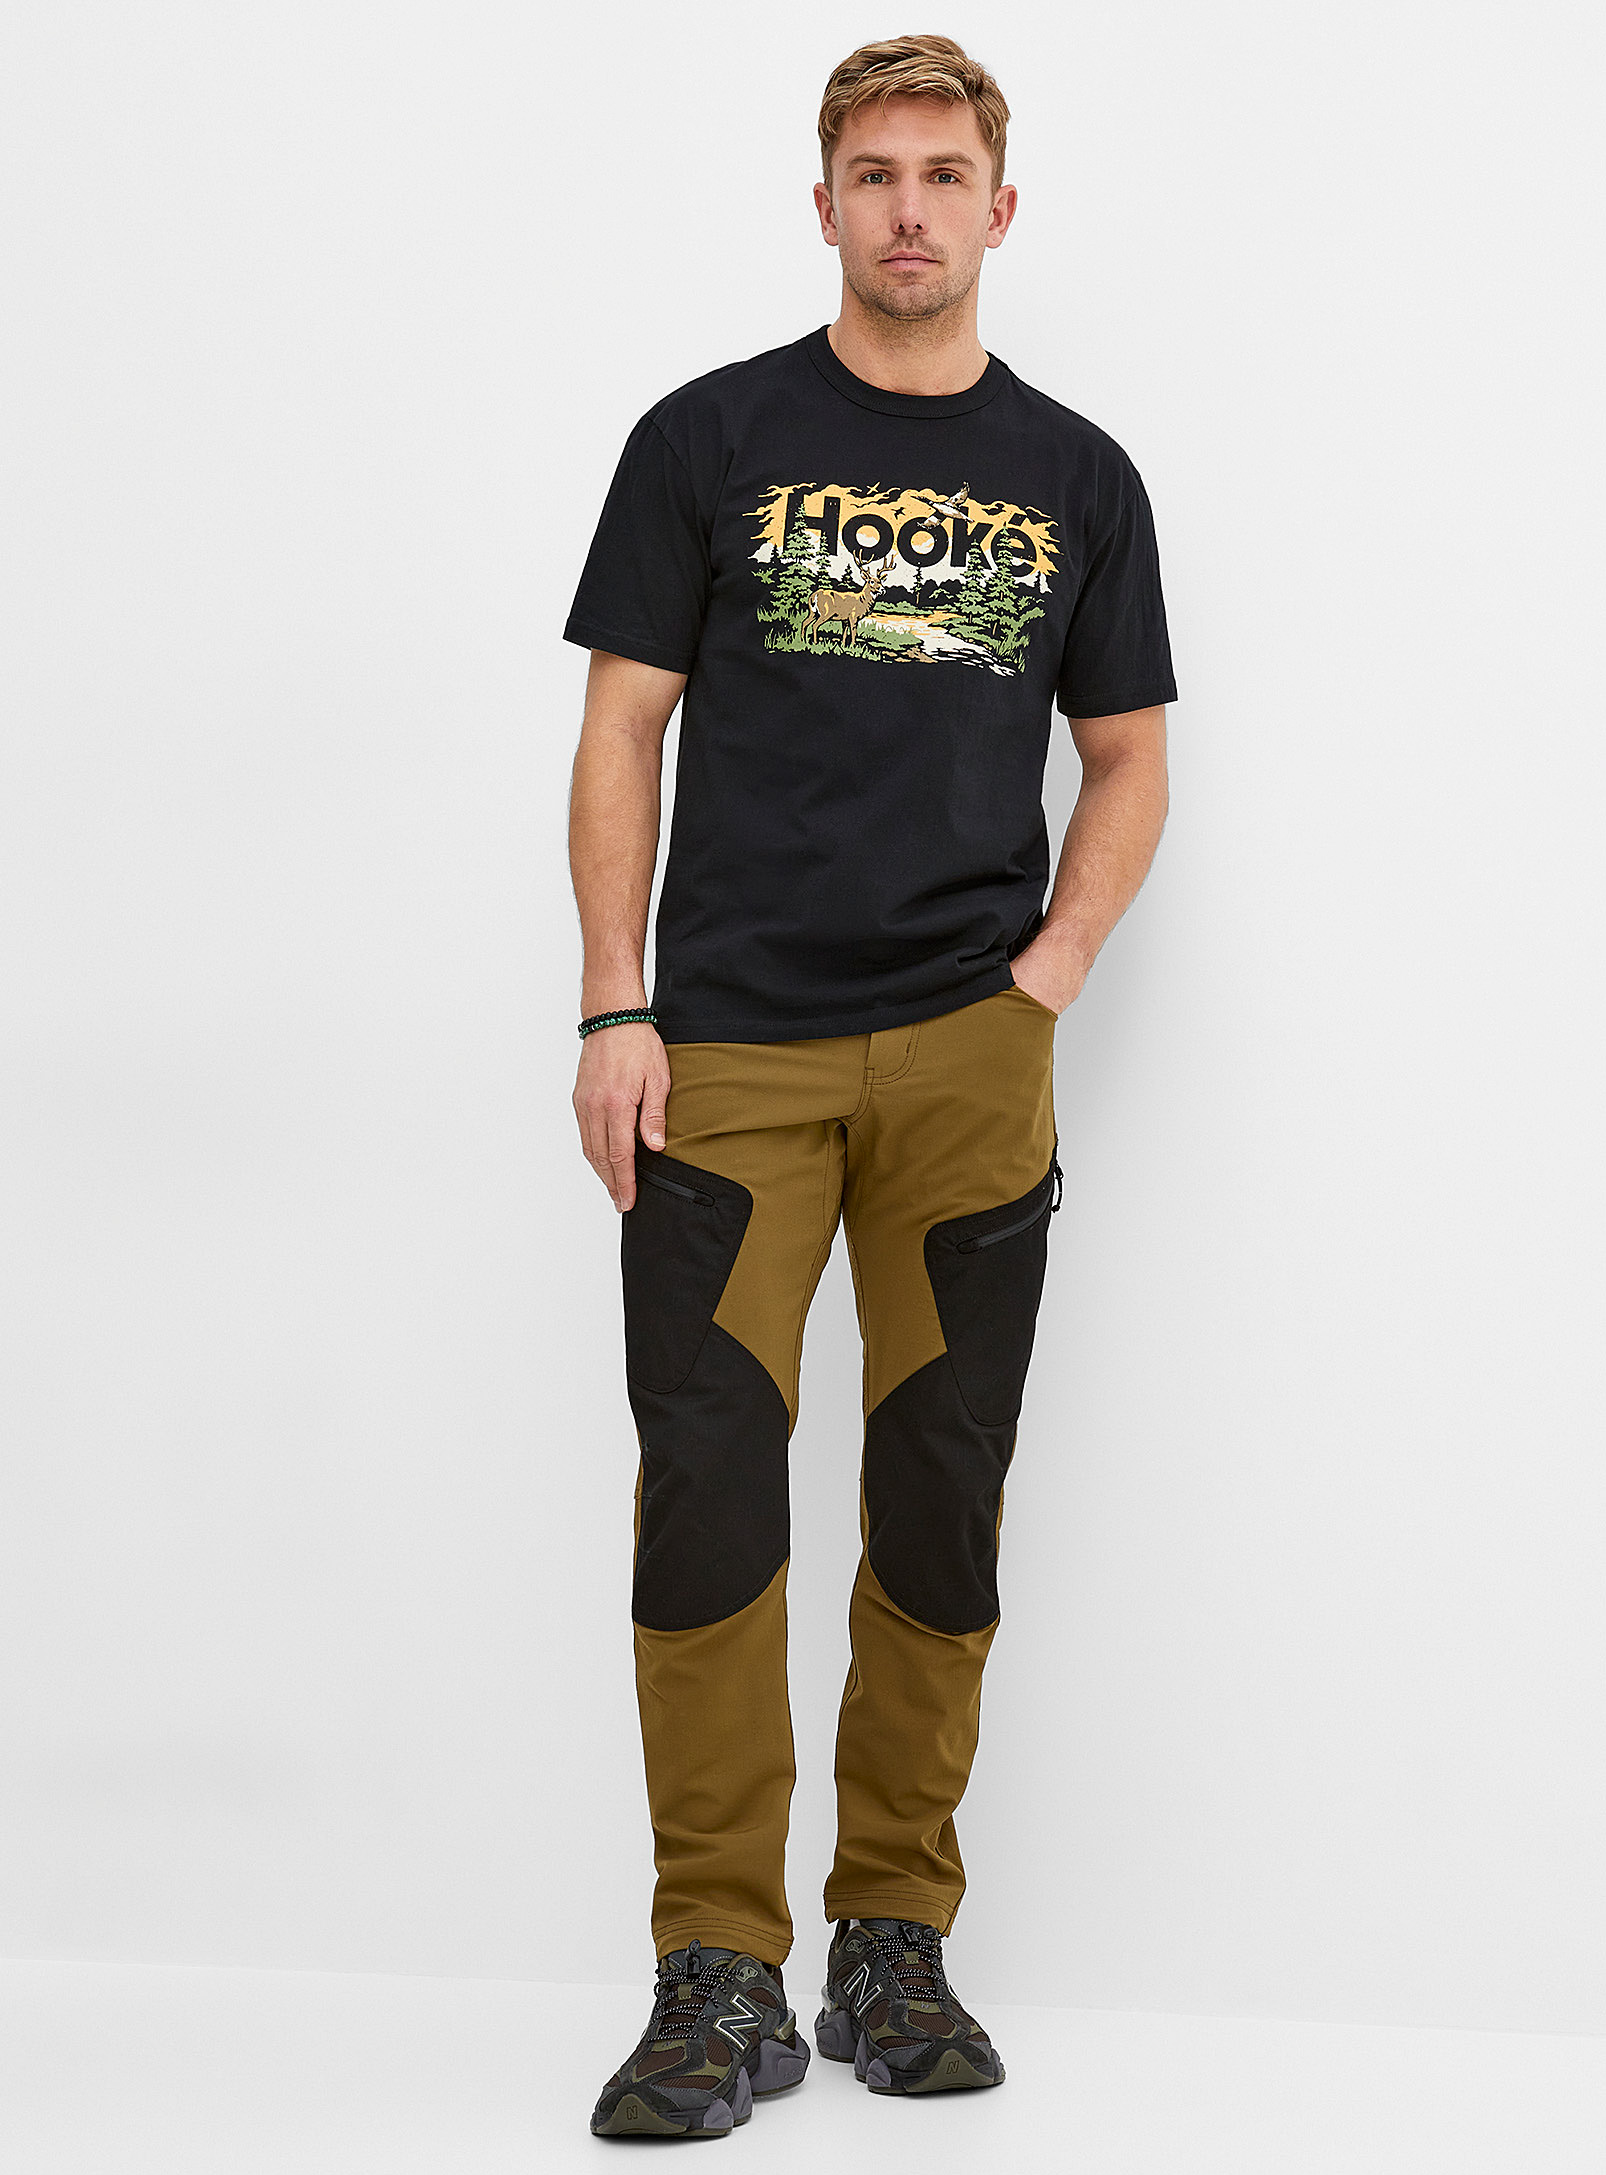 Hooké Expedition Pant In Brown